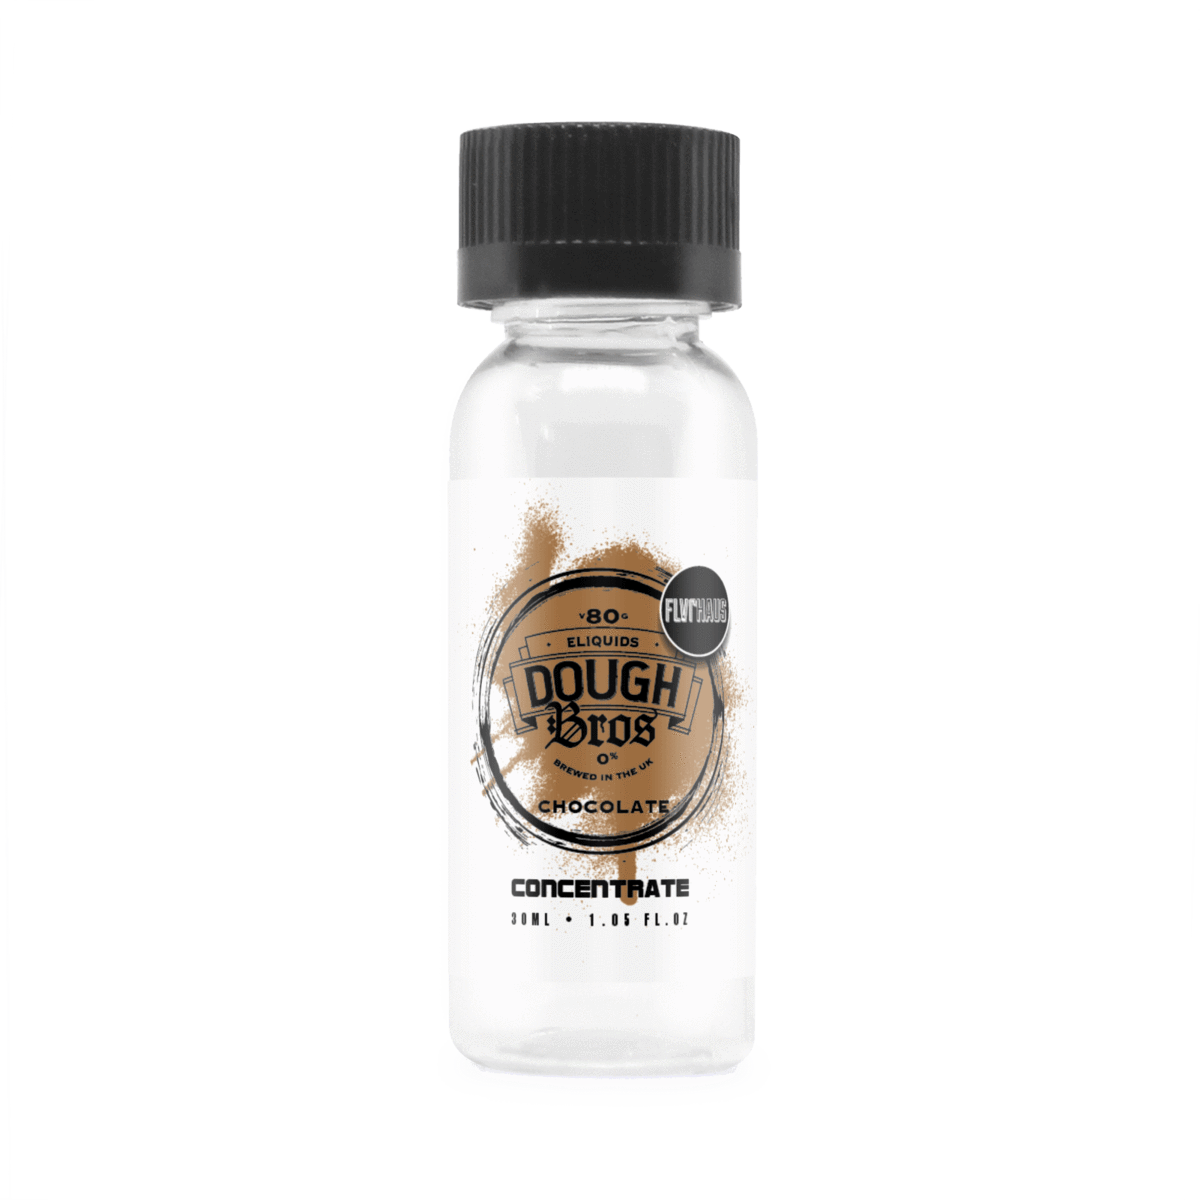 Chocolate Doughnut Flavour Concentrate by Dough Bros